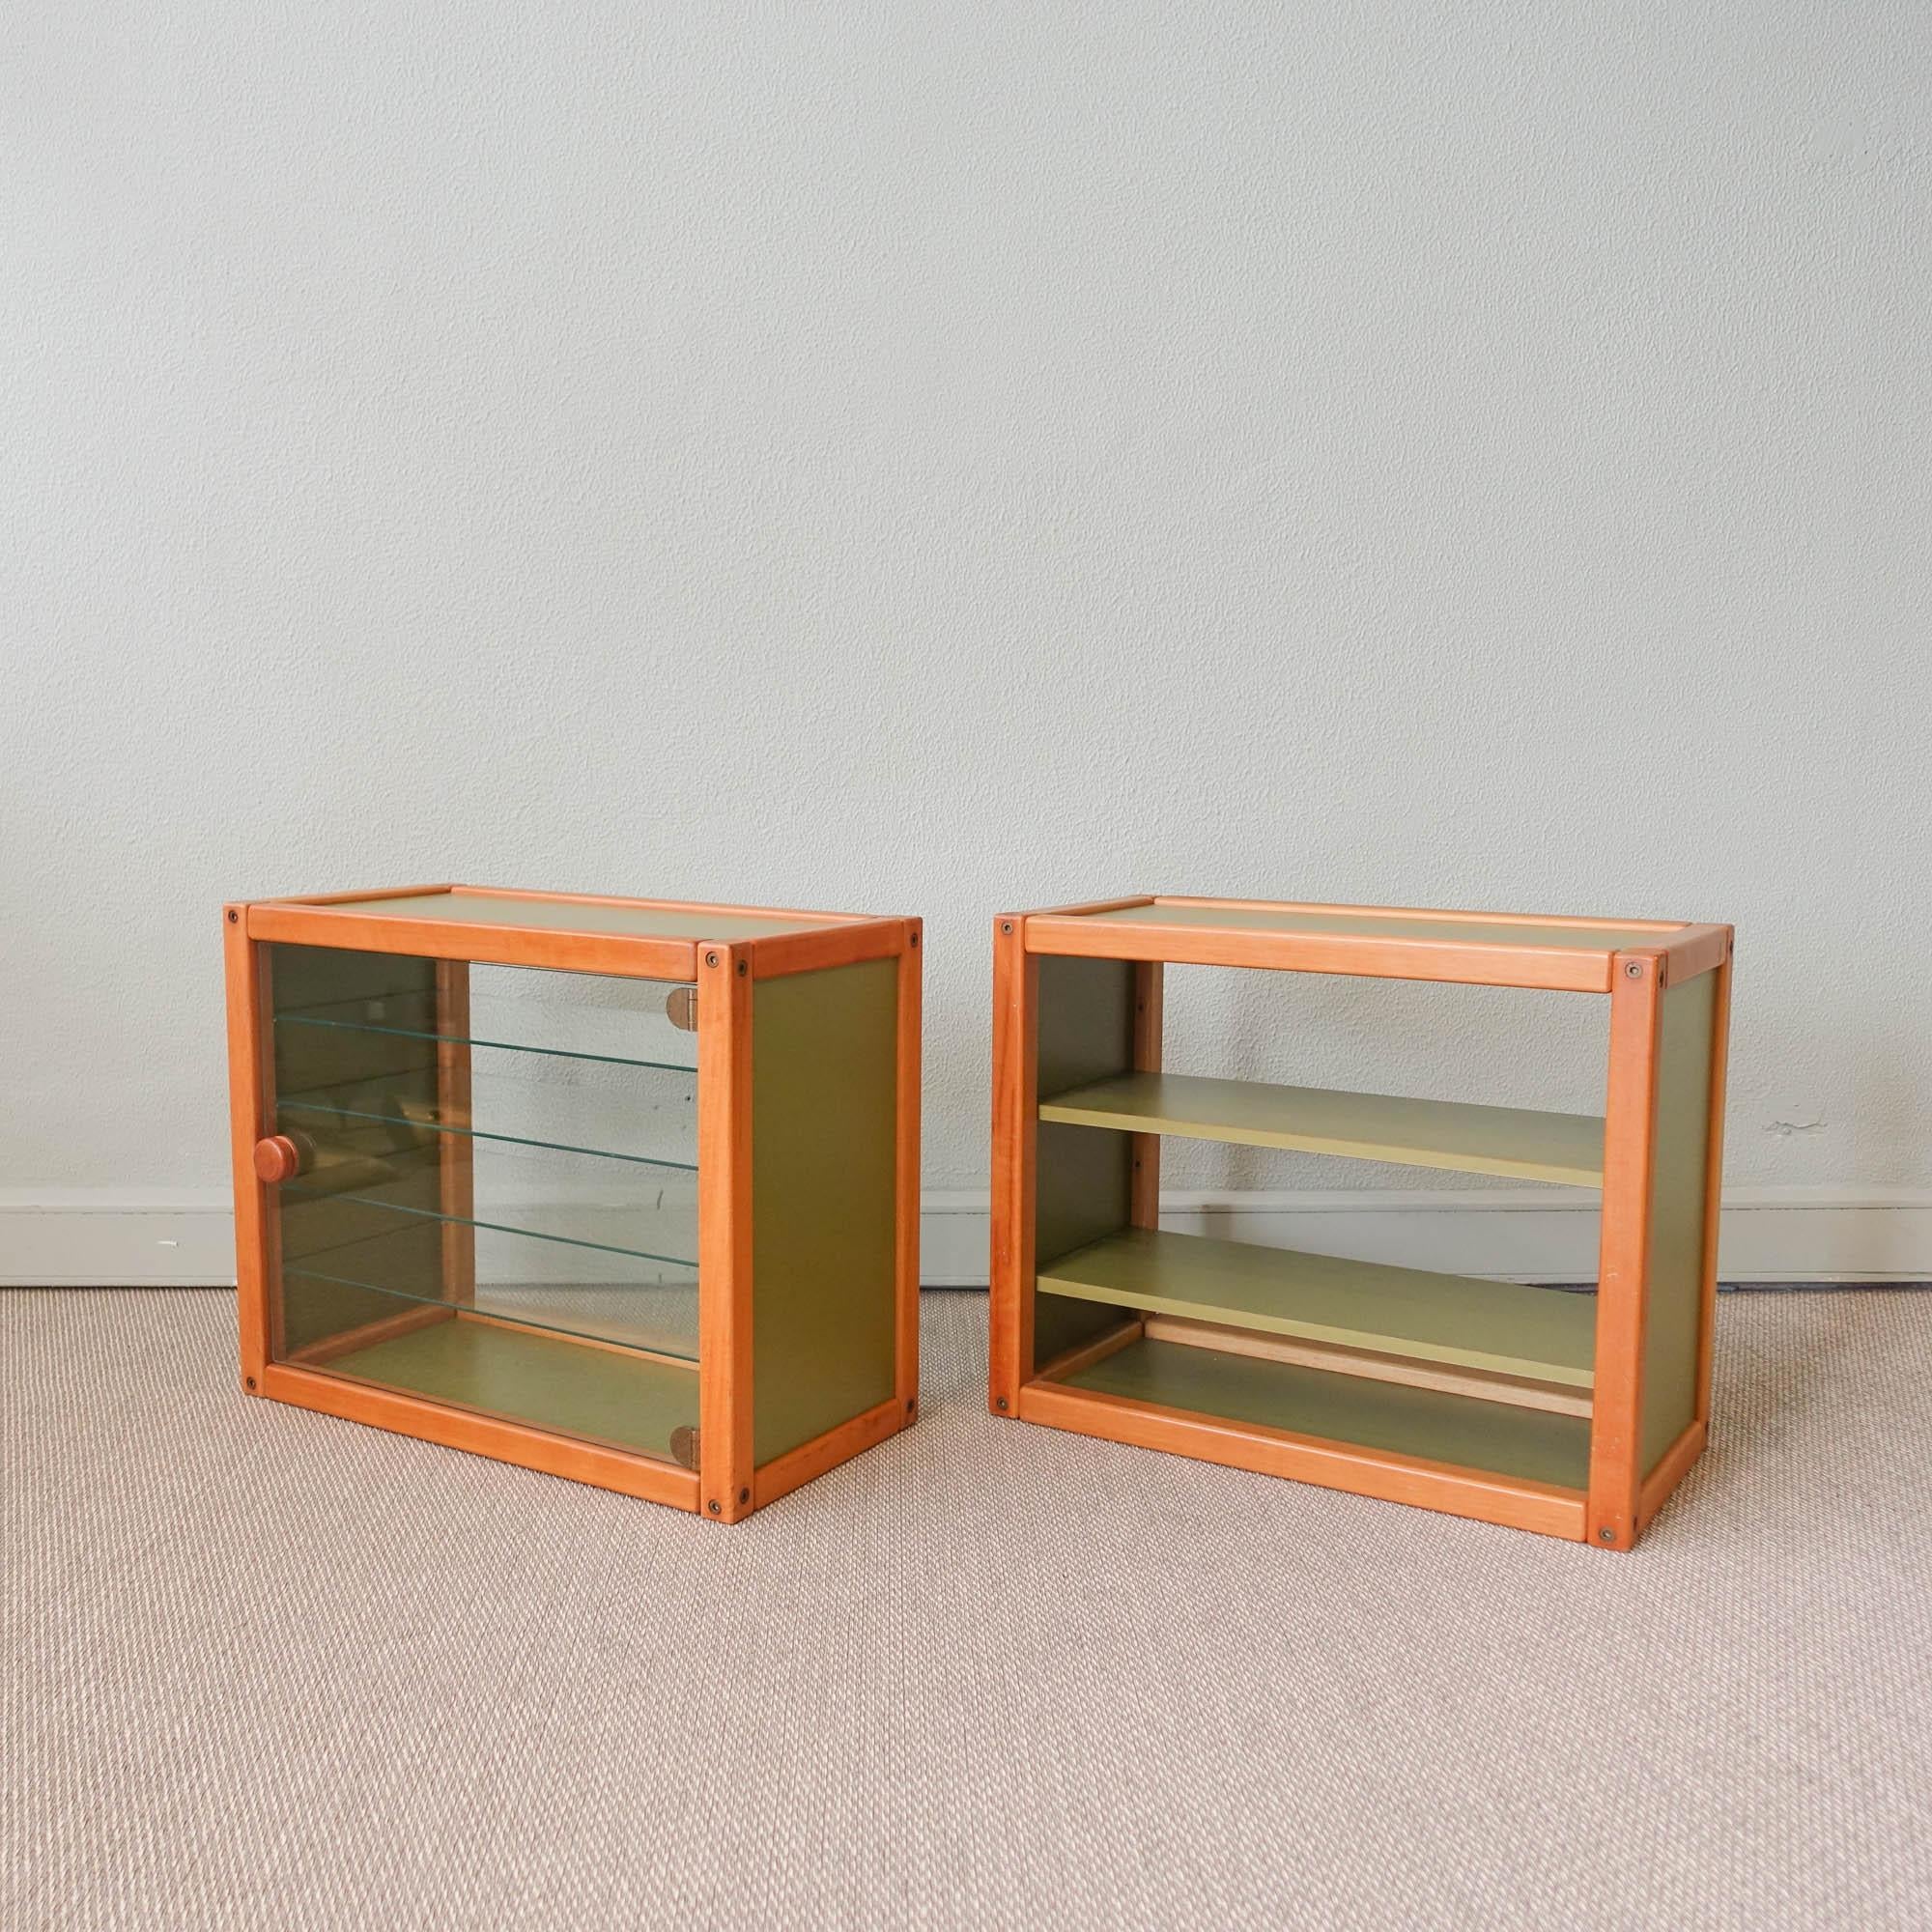 Pair of Vintage Profilsystem Collection Glass Storage Units by Elmar Flötotto For Sale 3